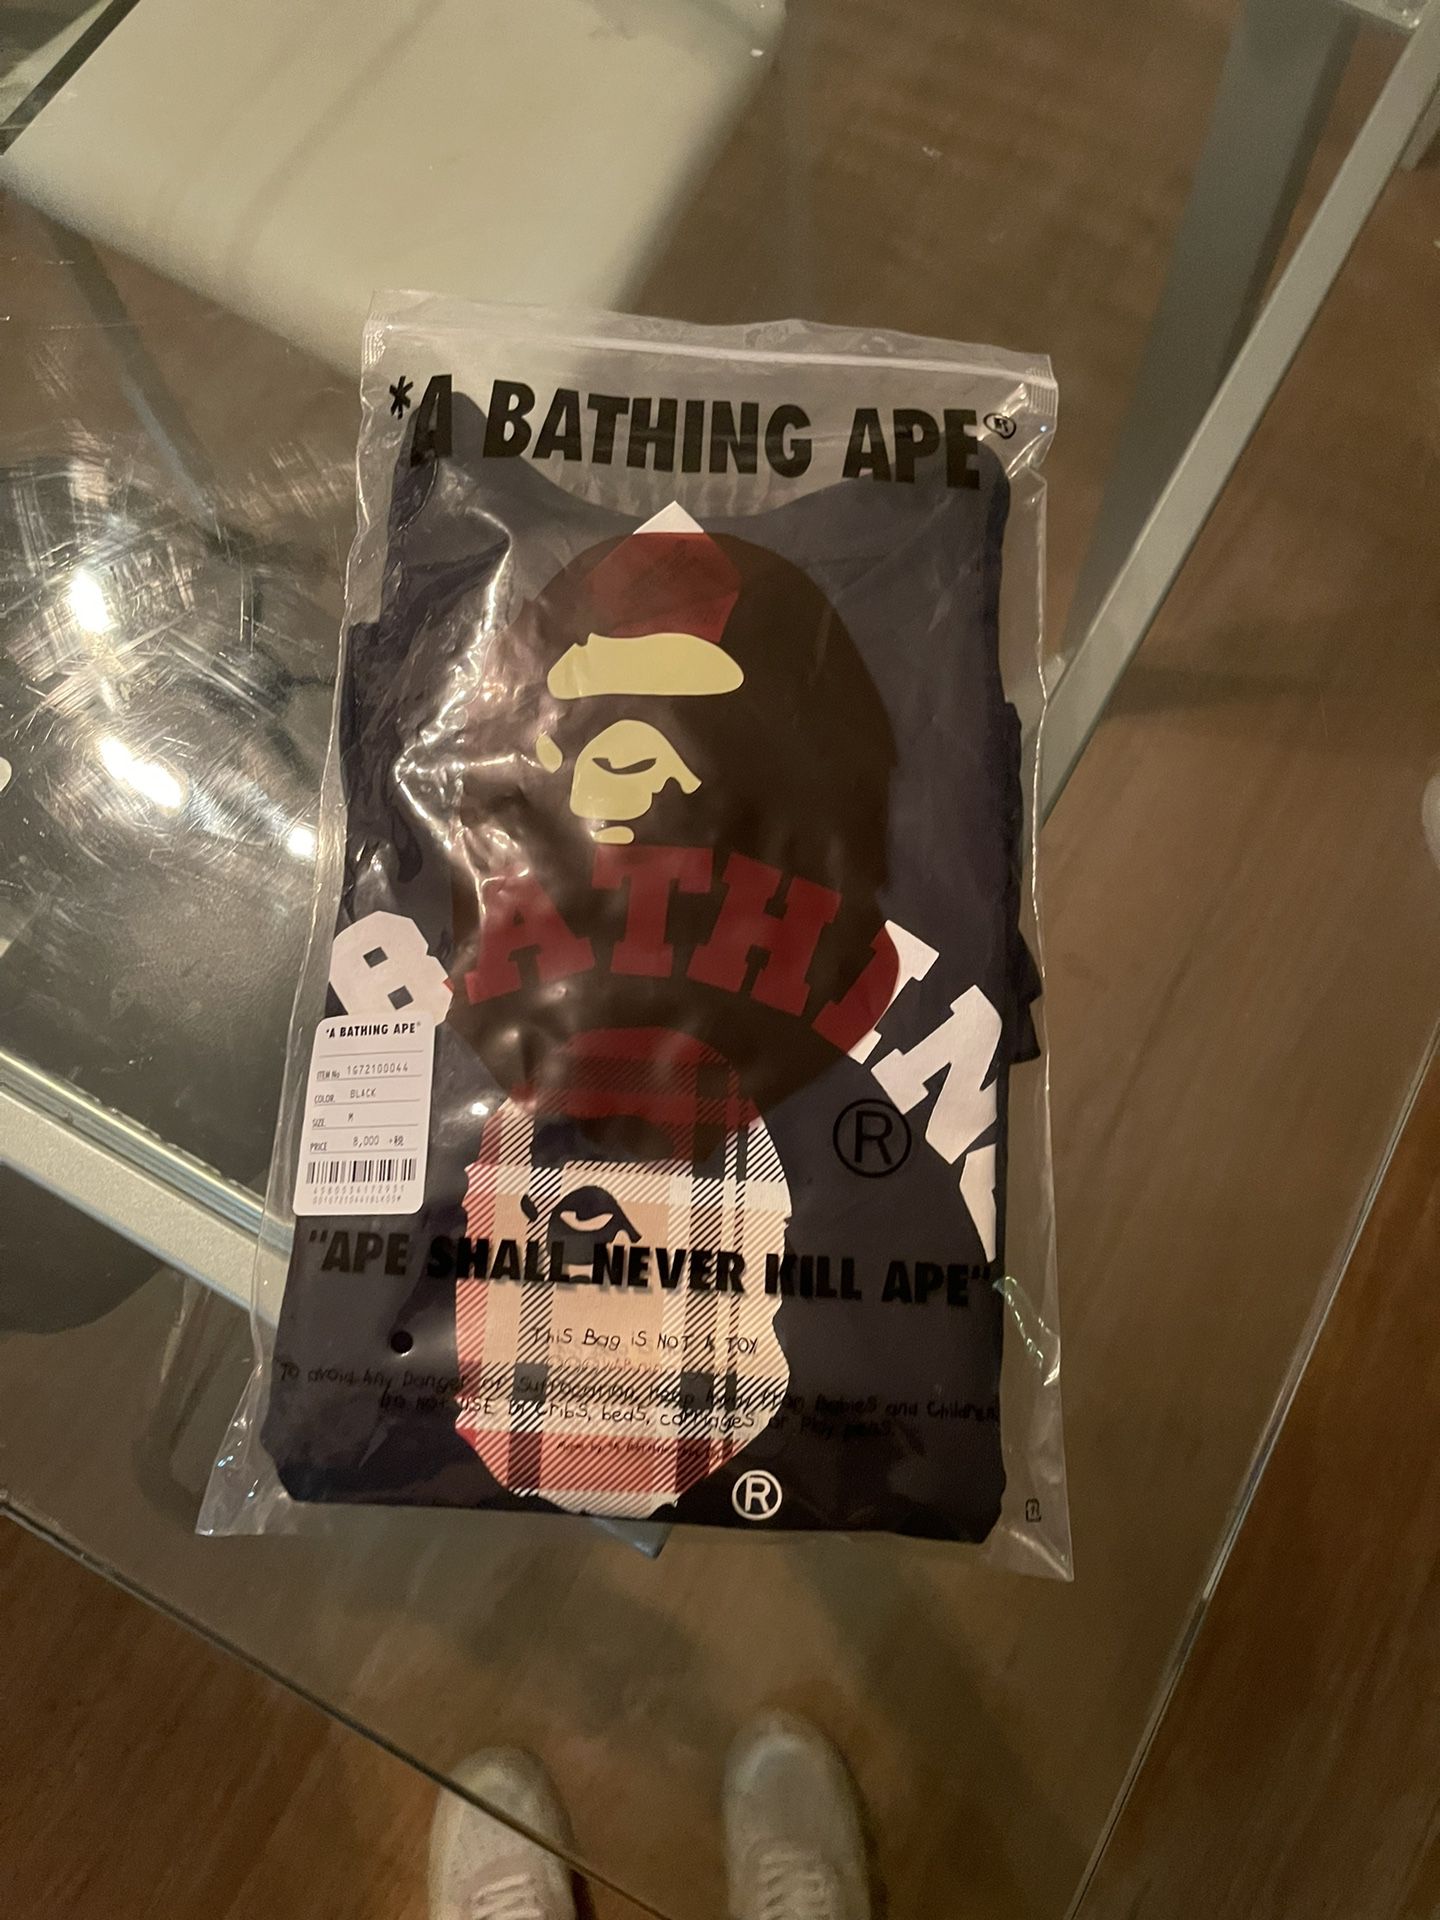 bape burberry collab for Sale in North Wales, PA - OfferUp